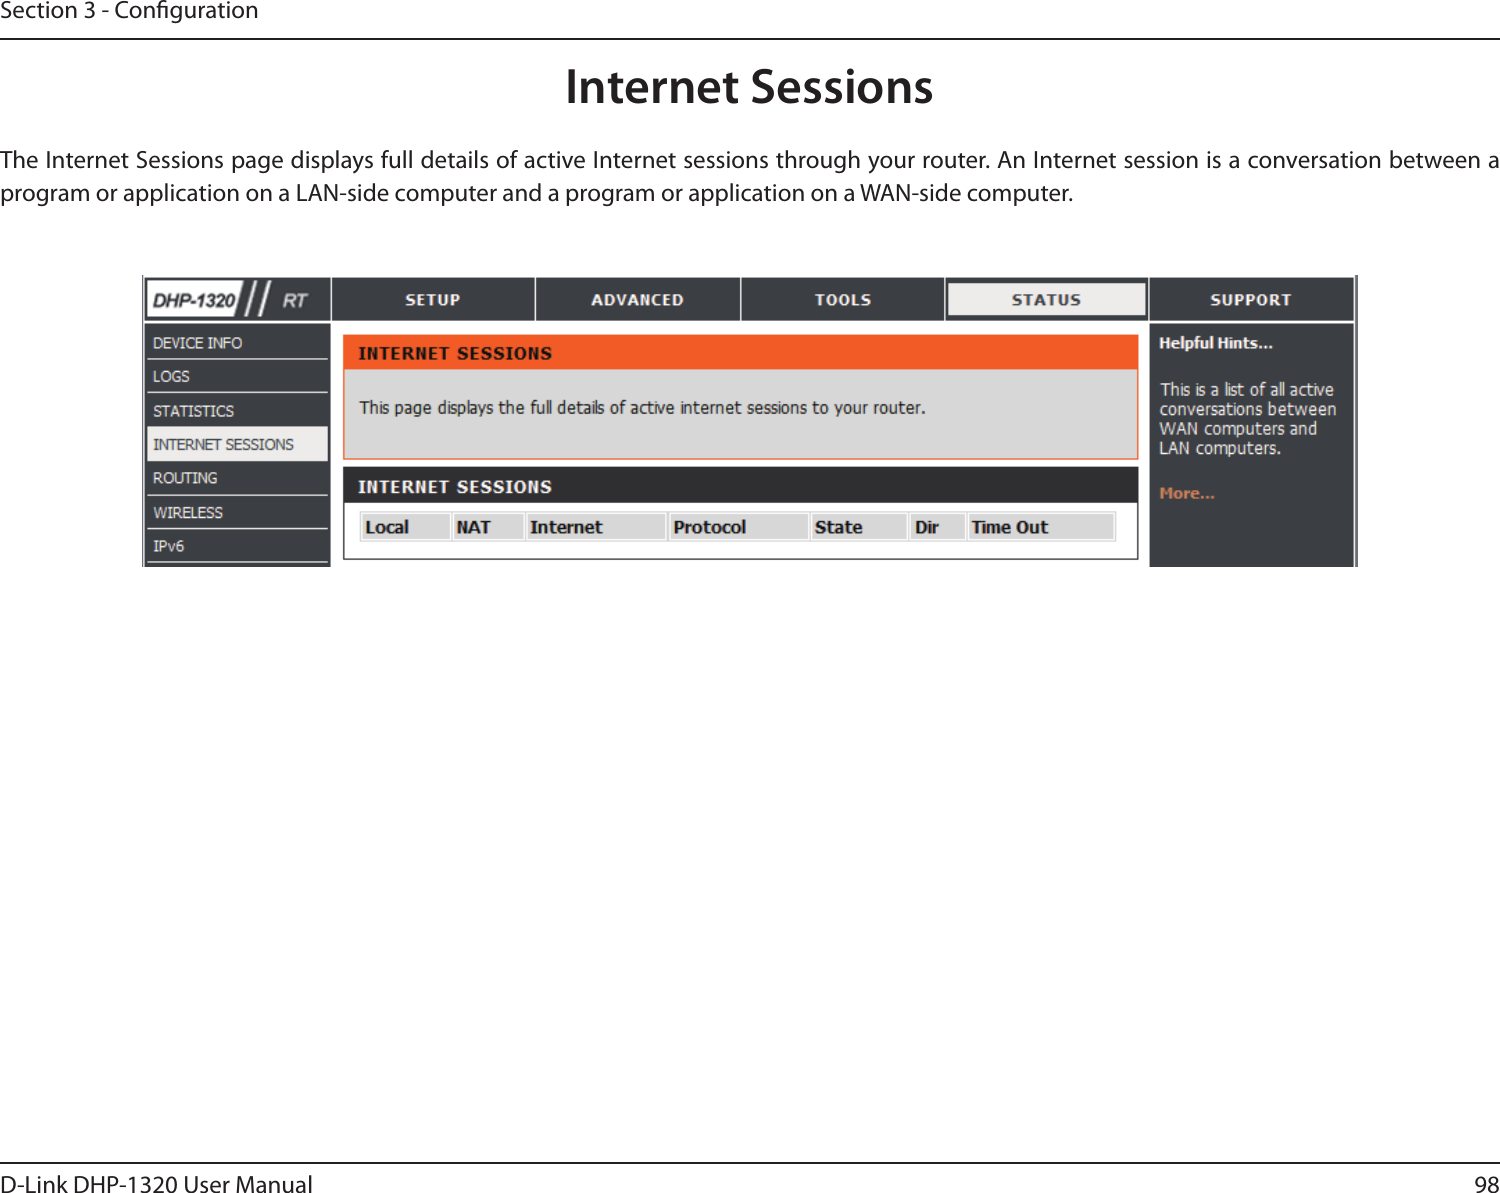 98D-Link DHP-1320 User ManualSection 3 - CongurationInternet SessionsThe Internet Sessions page displays full details of active Internet sessions through your router. An Internet session is a conversation between a program or application on a LAN-side computer and a program or application on a WAN-side computer. 